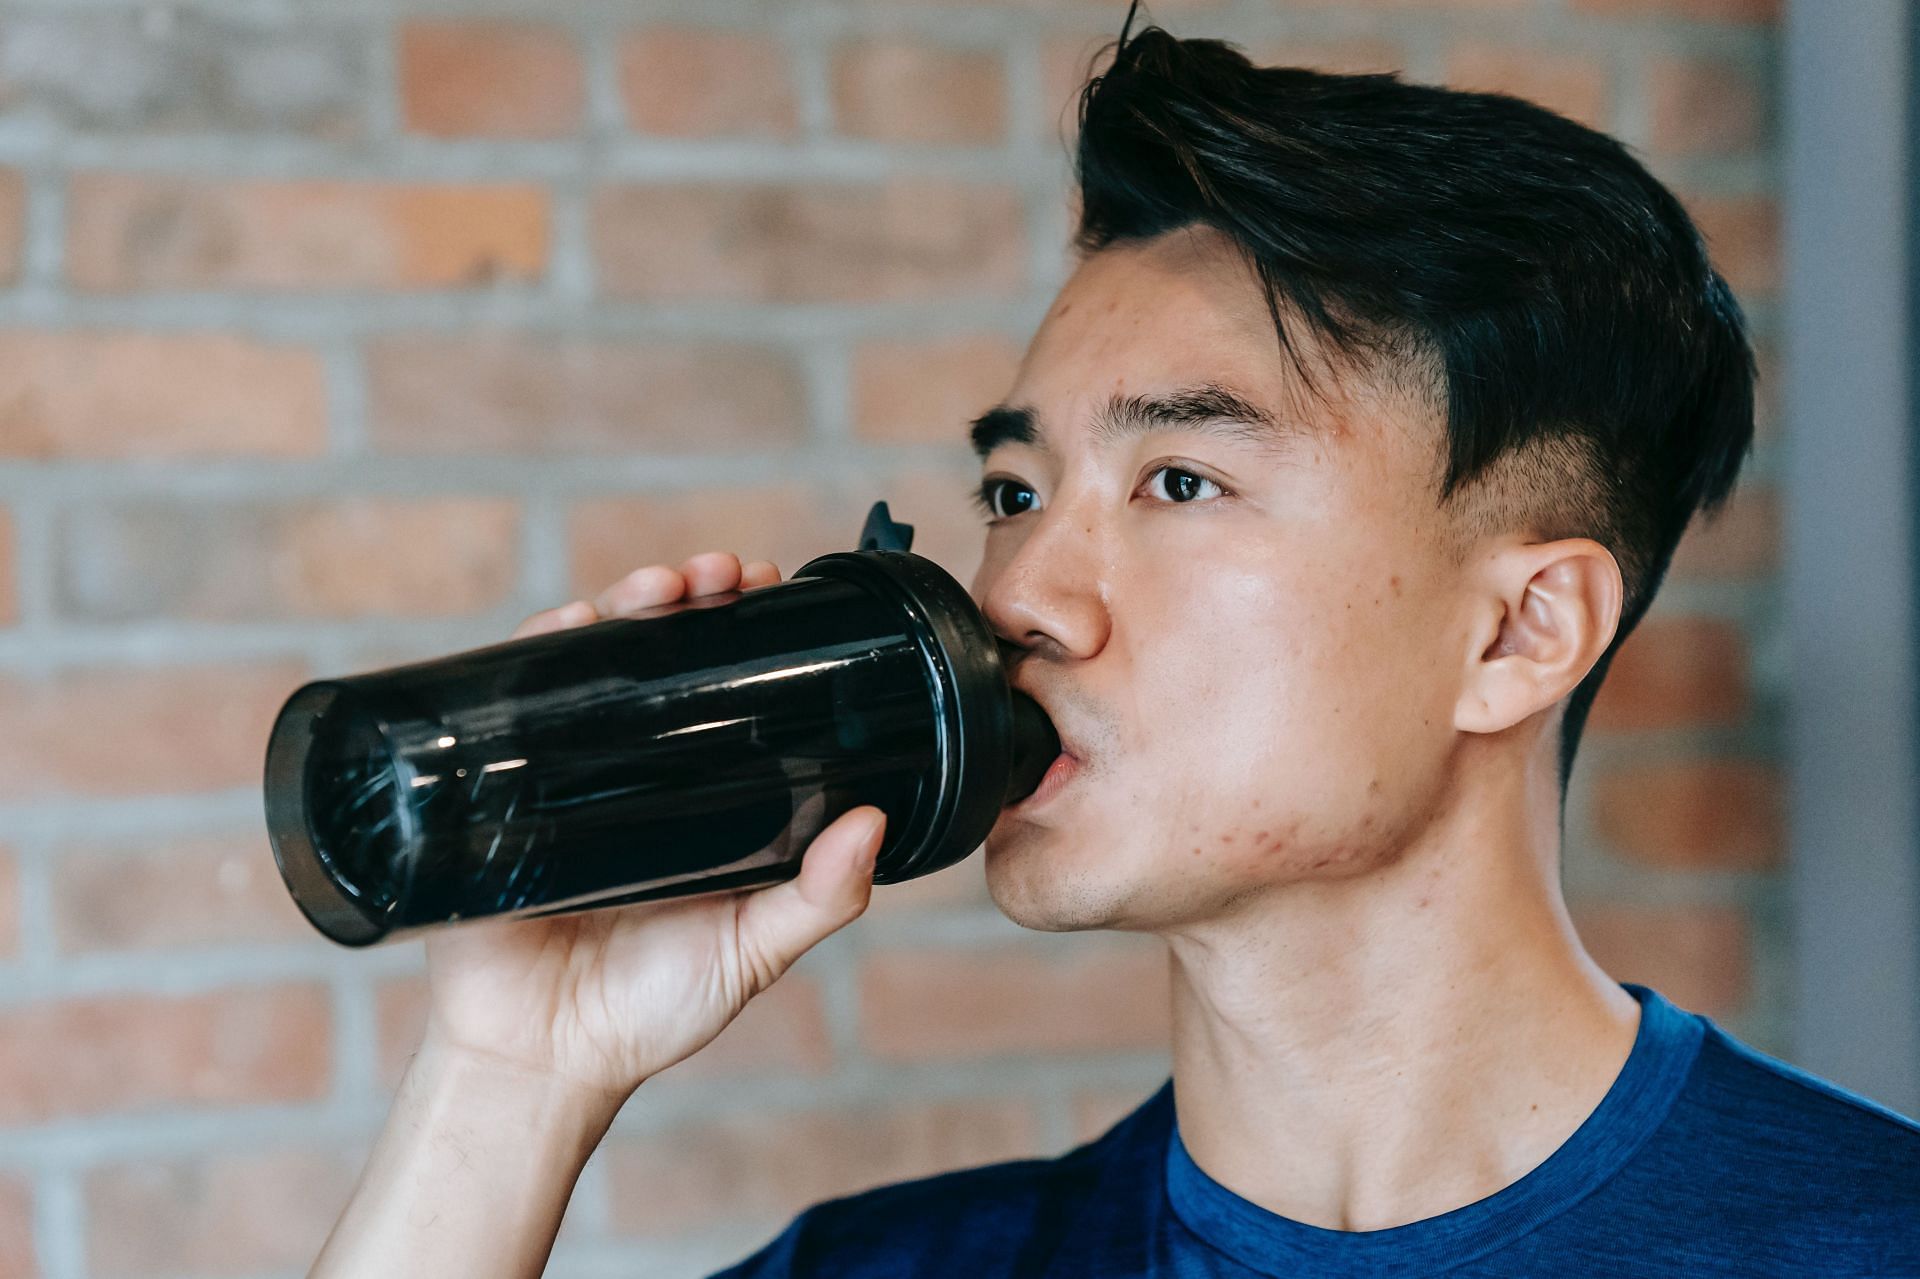 Does pre workout make you poop more? Yes, due to artificial sweeteners. (Image via Pexels/ Andres Ayrton)